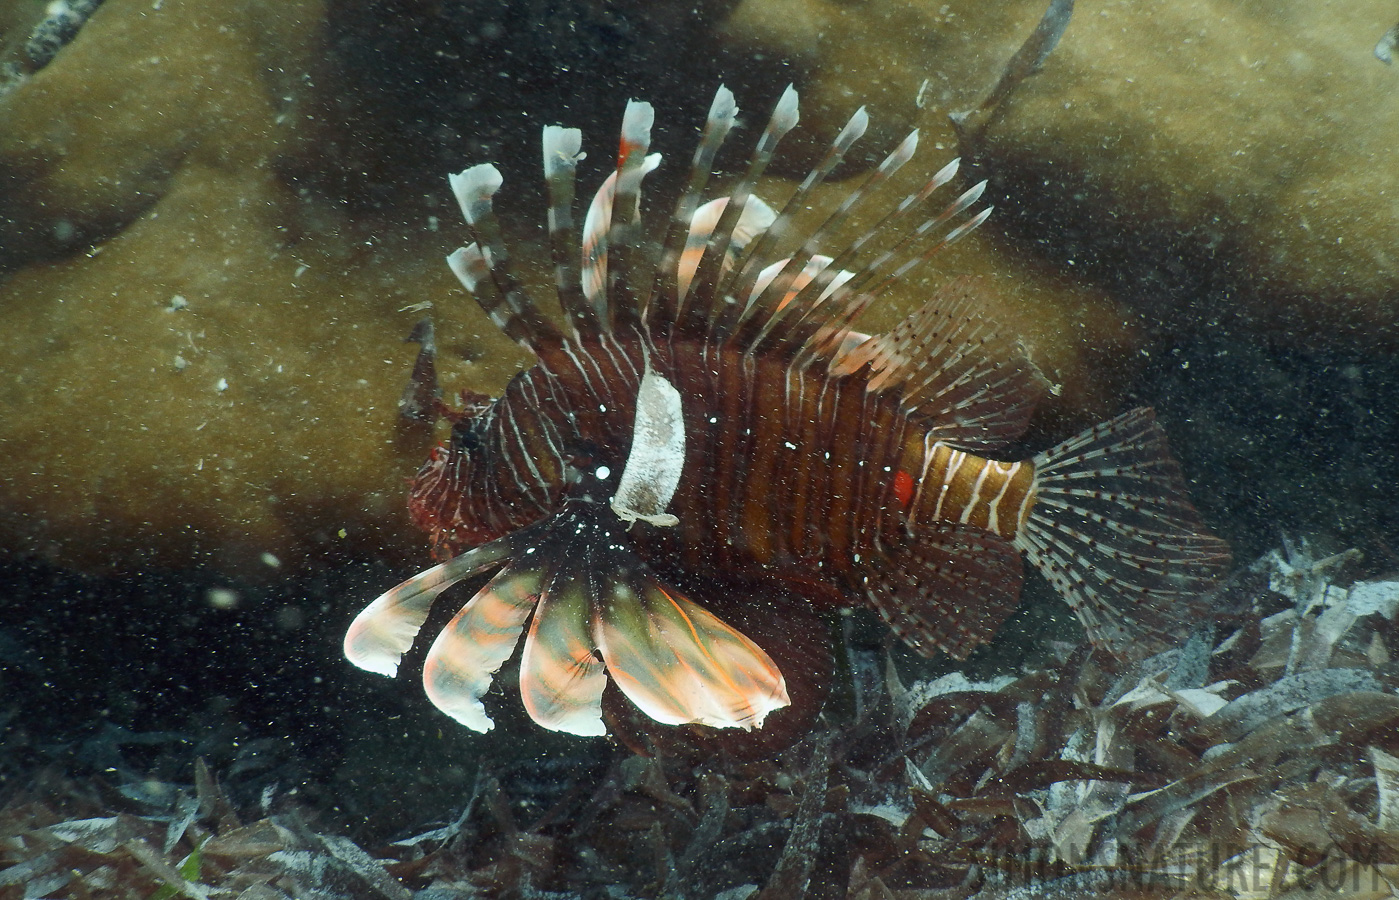 Pterois miles [7.7 mm, 1/100 sec at f / 4.0, ISO 125]